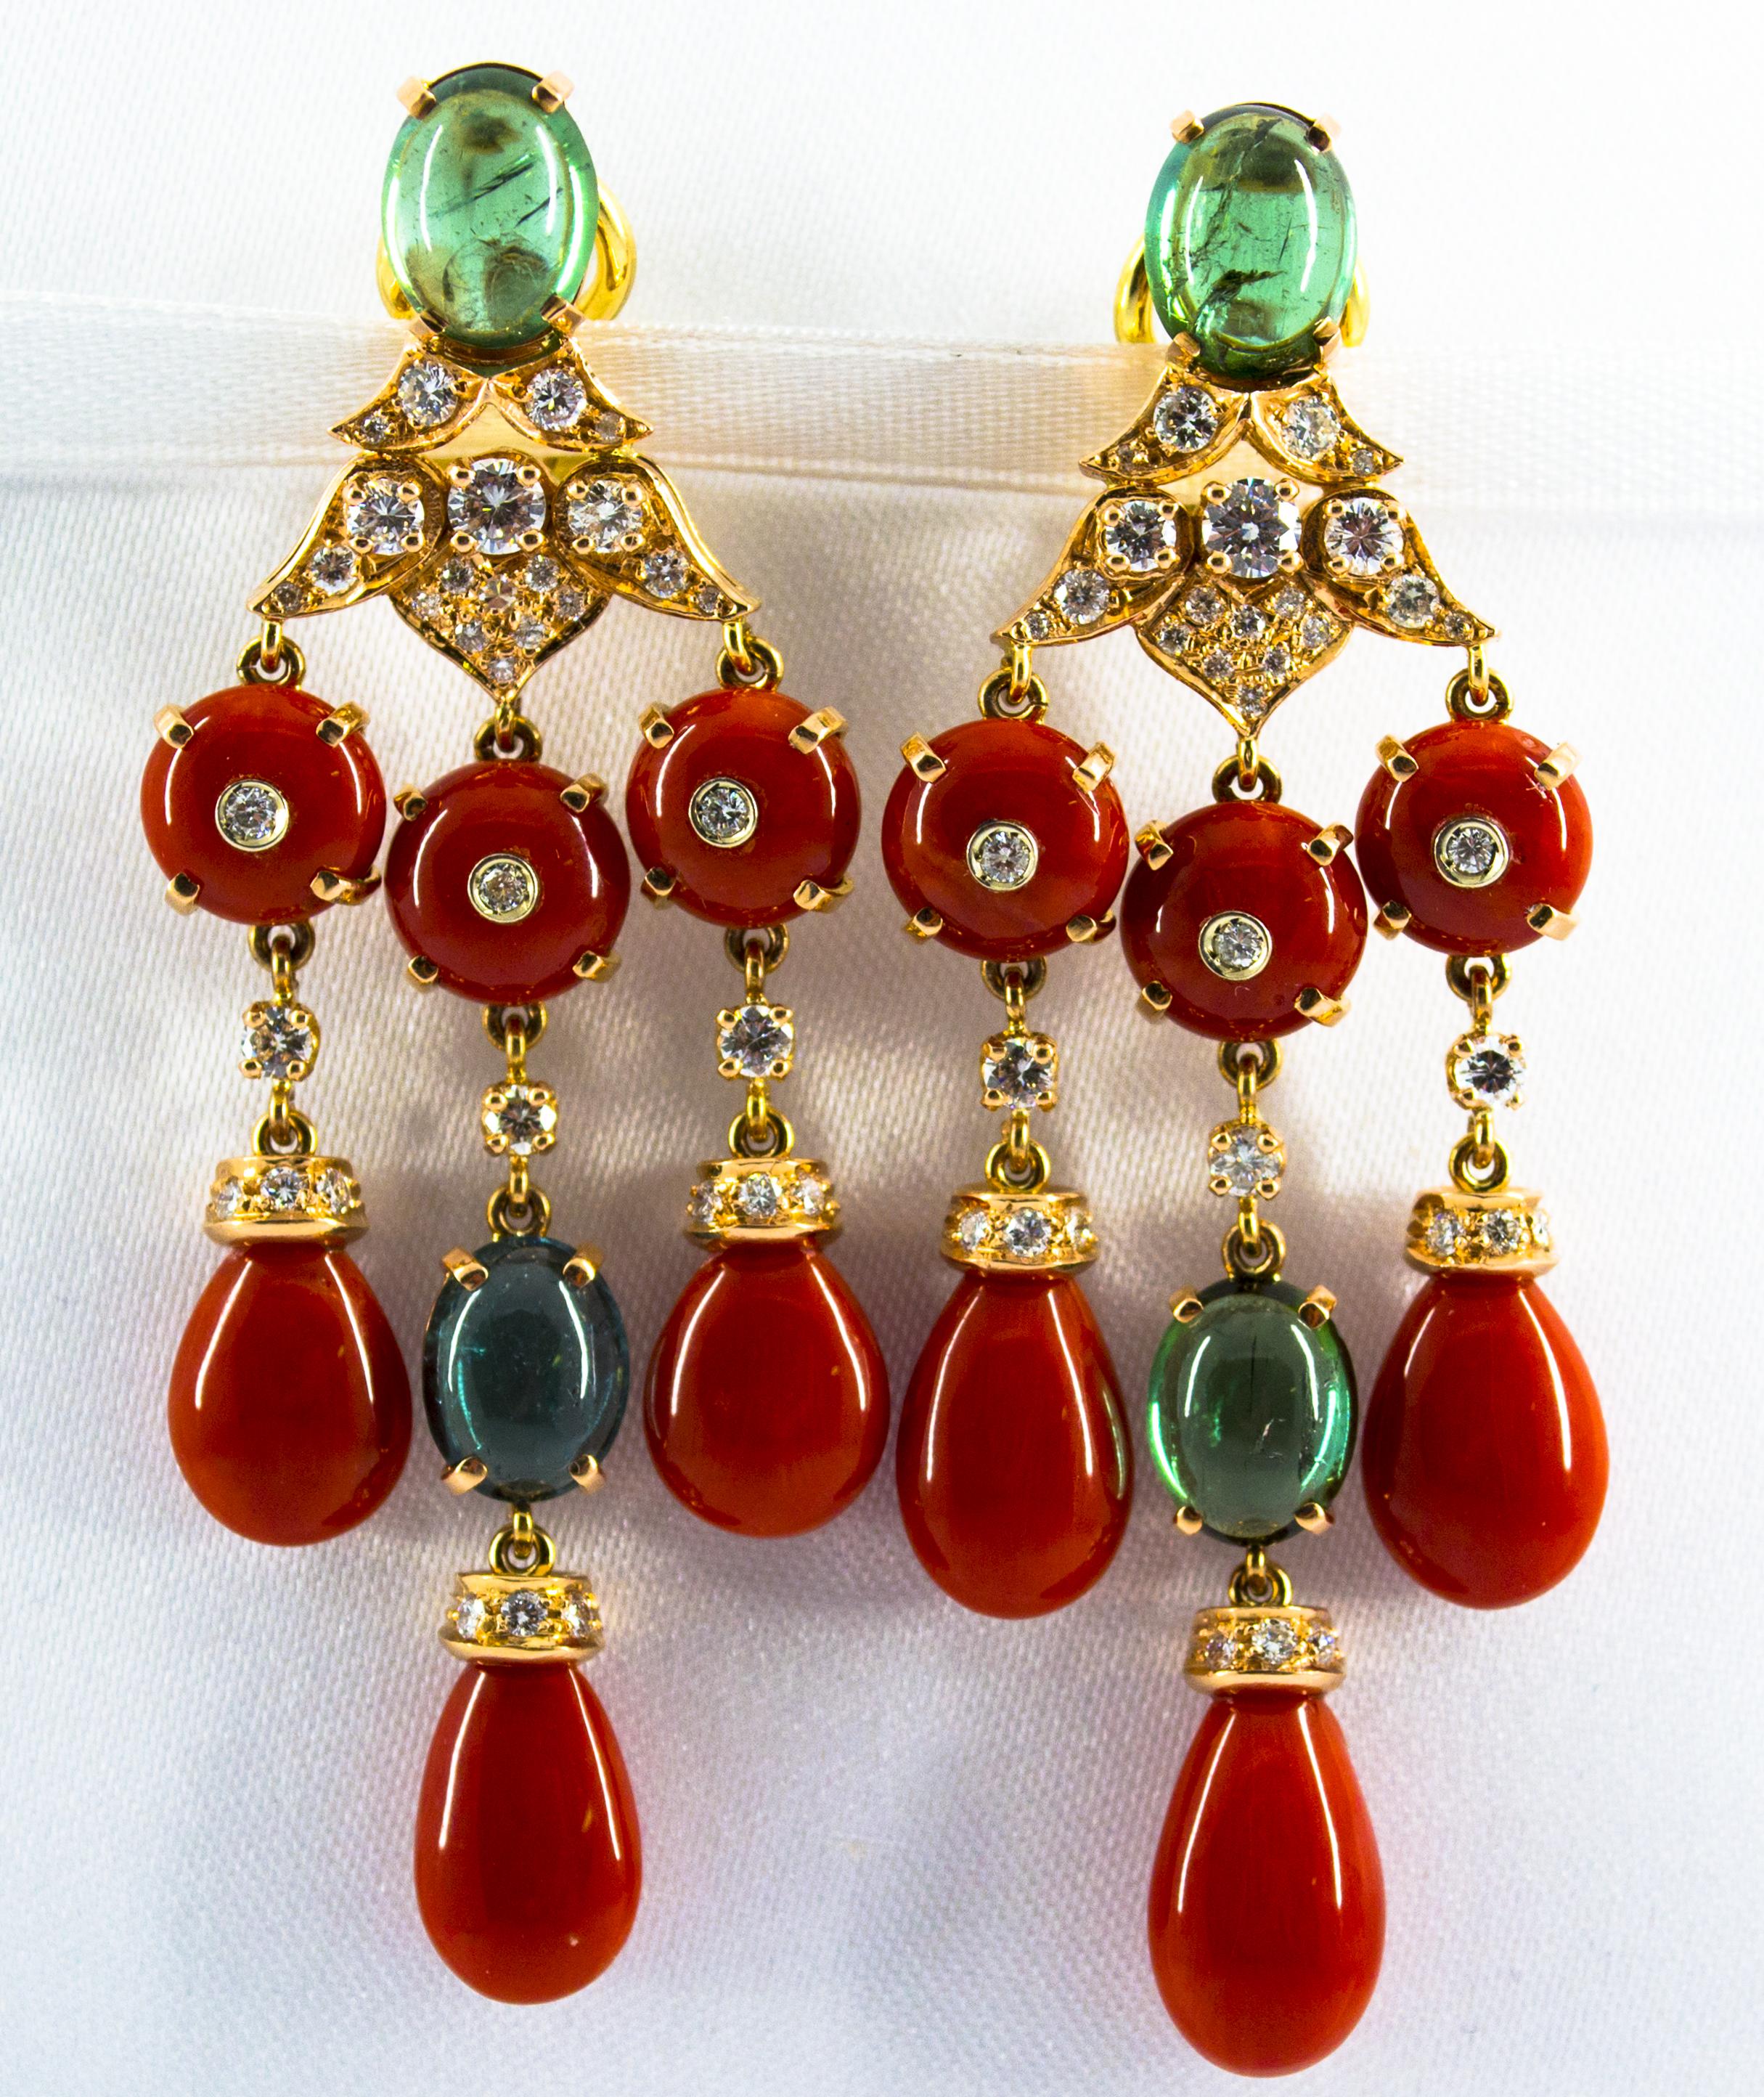 These Clip-On Drop Earrings are made of 14K Yellow Gold.
These Earrings have 1.60 Carats of White Diamonds.
These Earrings have 8.80 Carats of Green Tourmaline.
These Earrings have Mediterranean (Sardinia, Italy) Red Coral.
All our Earrings have